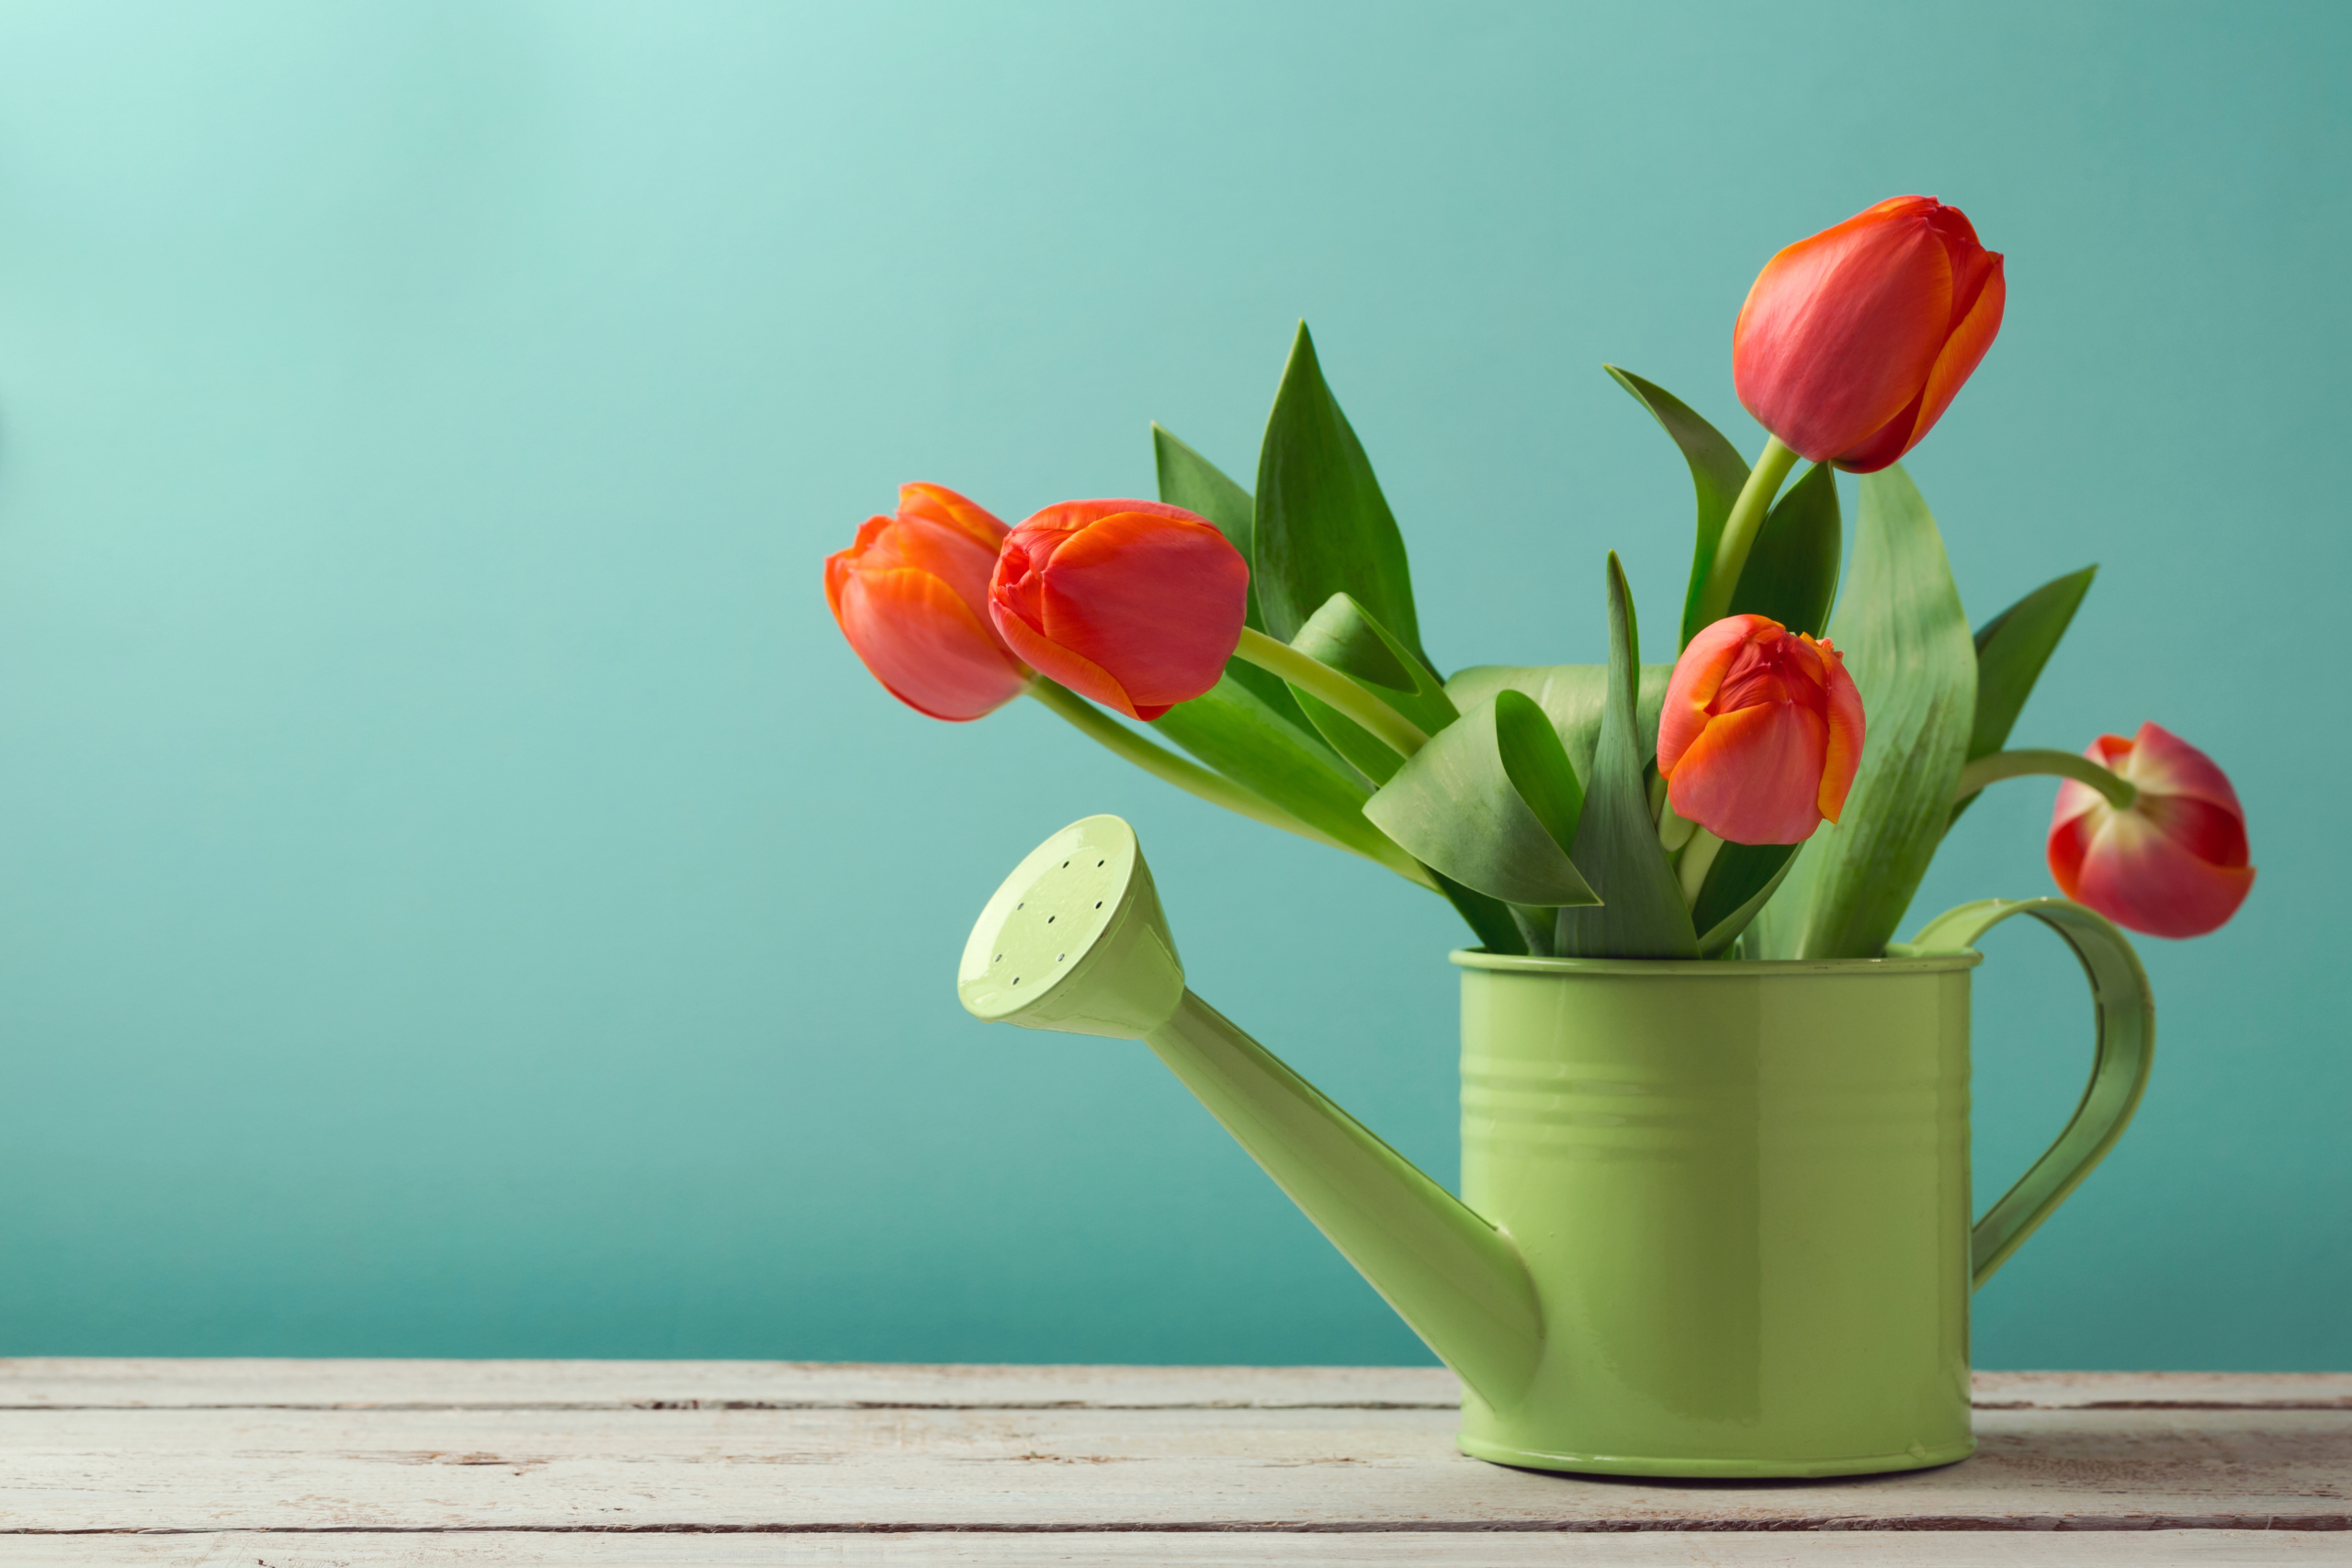 General 2560x1707 still life flowers tulips plants watering can simple background cyan background red flowers